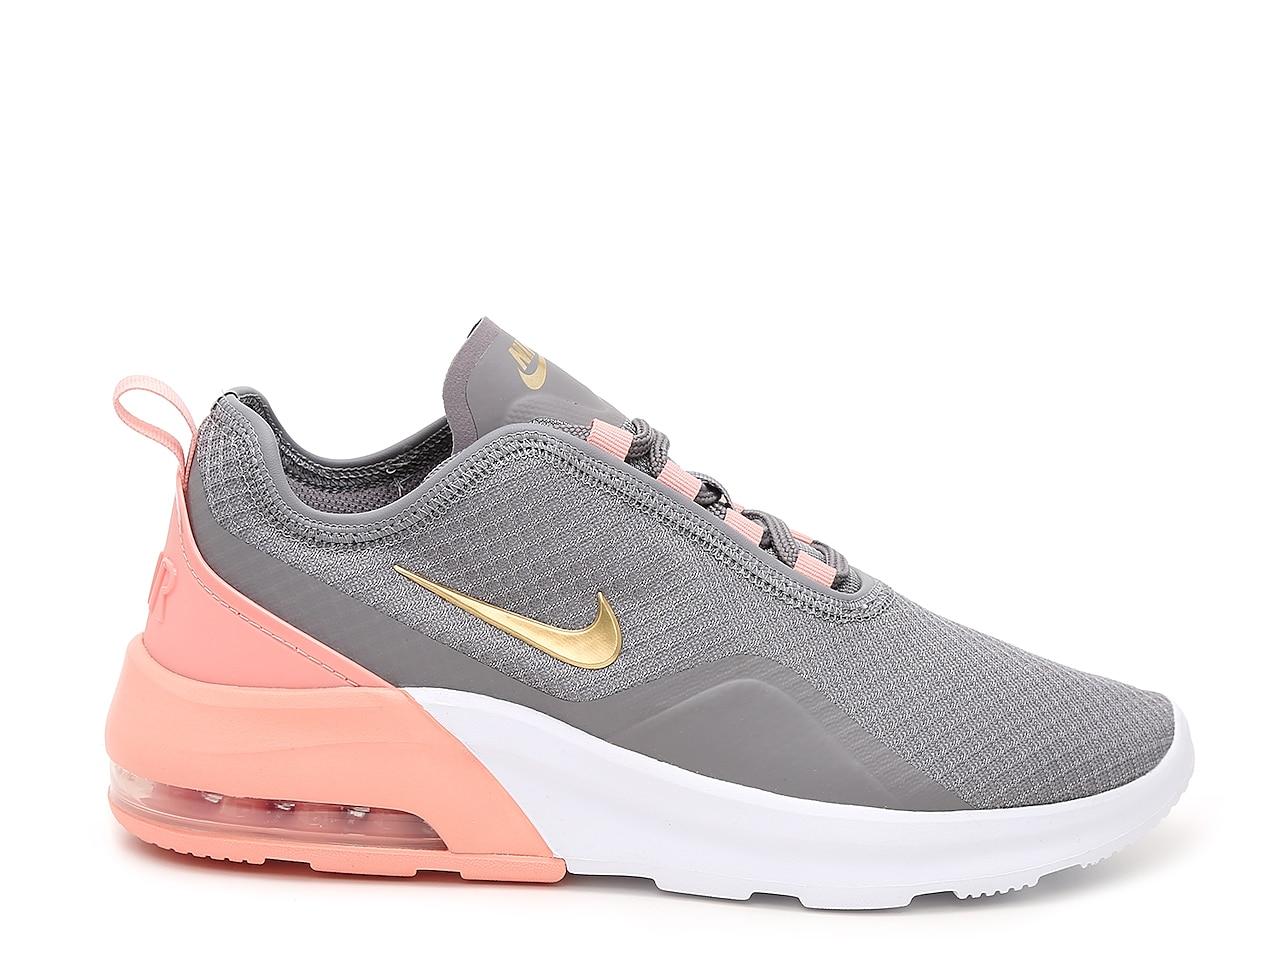 Nike Air Max Motion 2 Shoes in Gray | Lyst